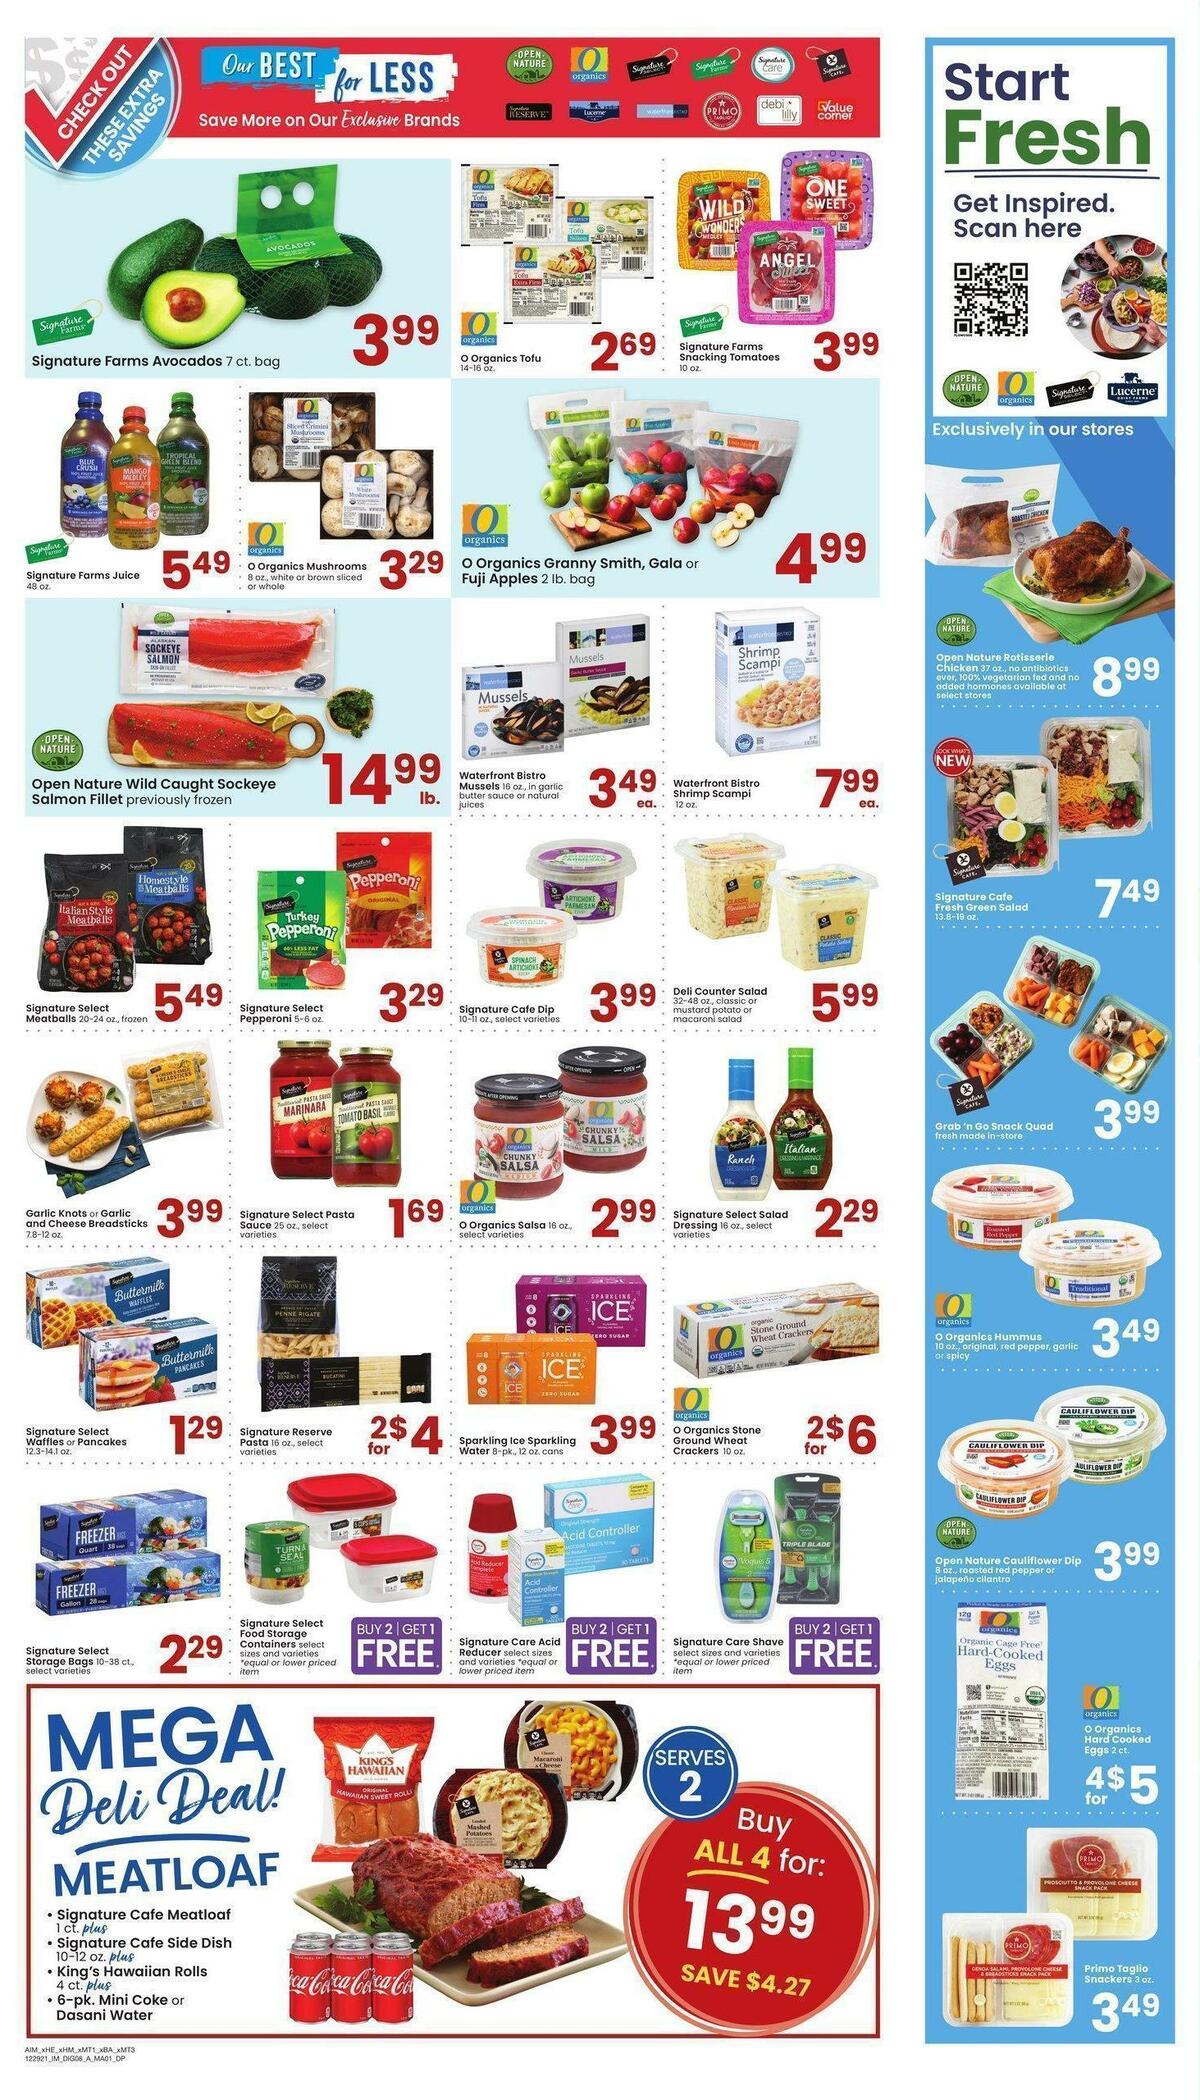 Albertsons Weekly Ad from December 29